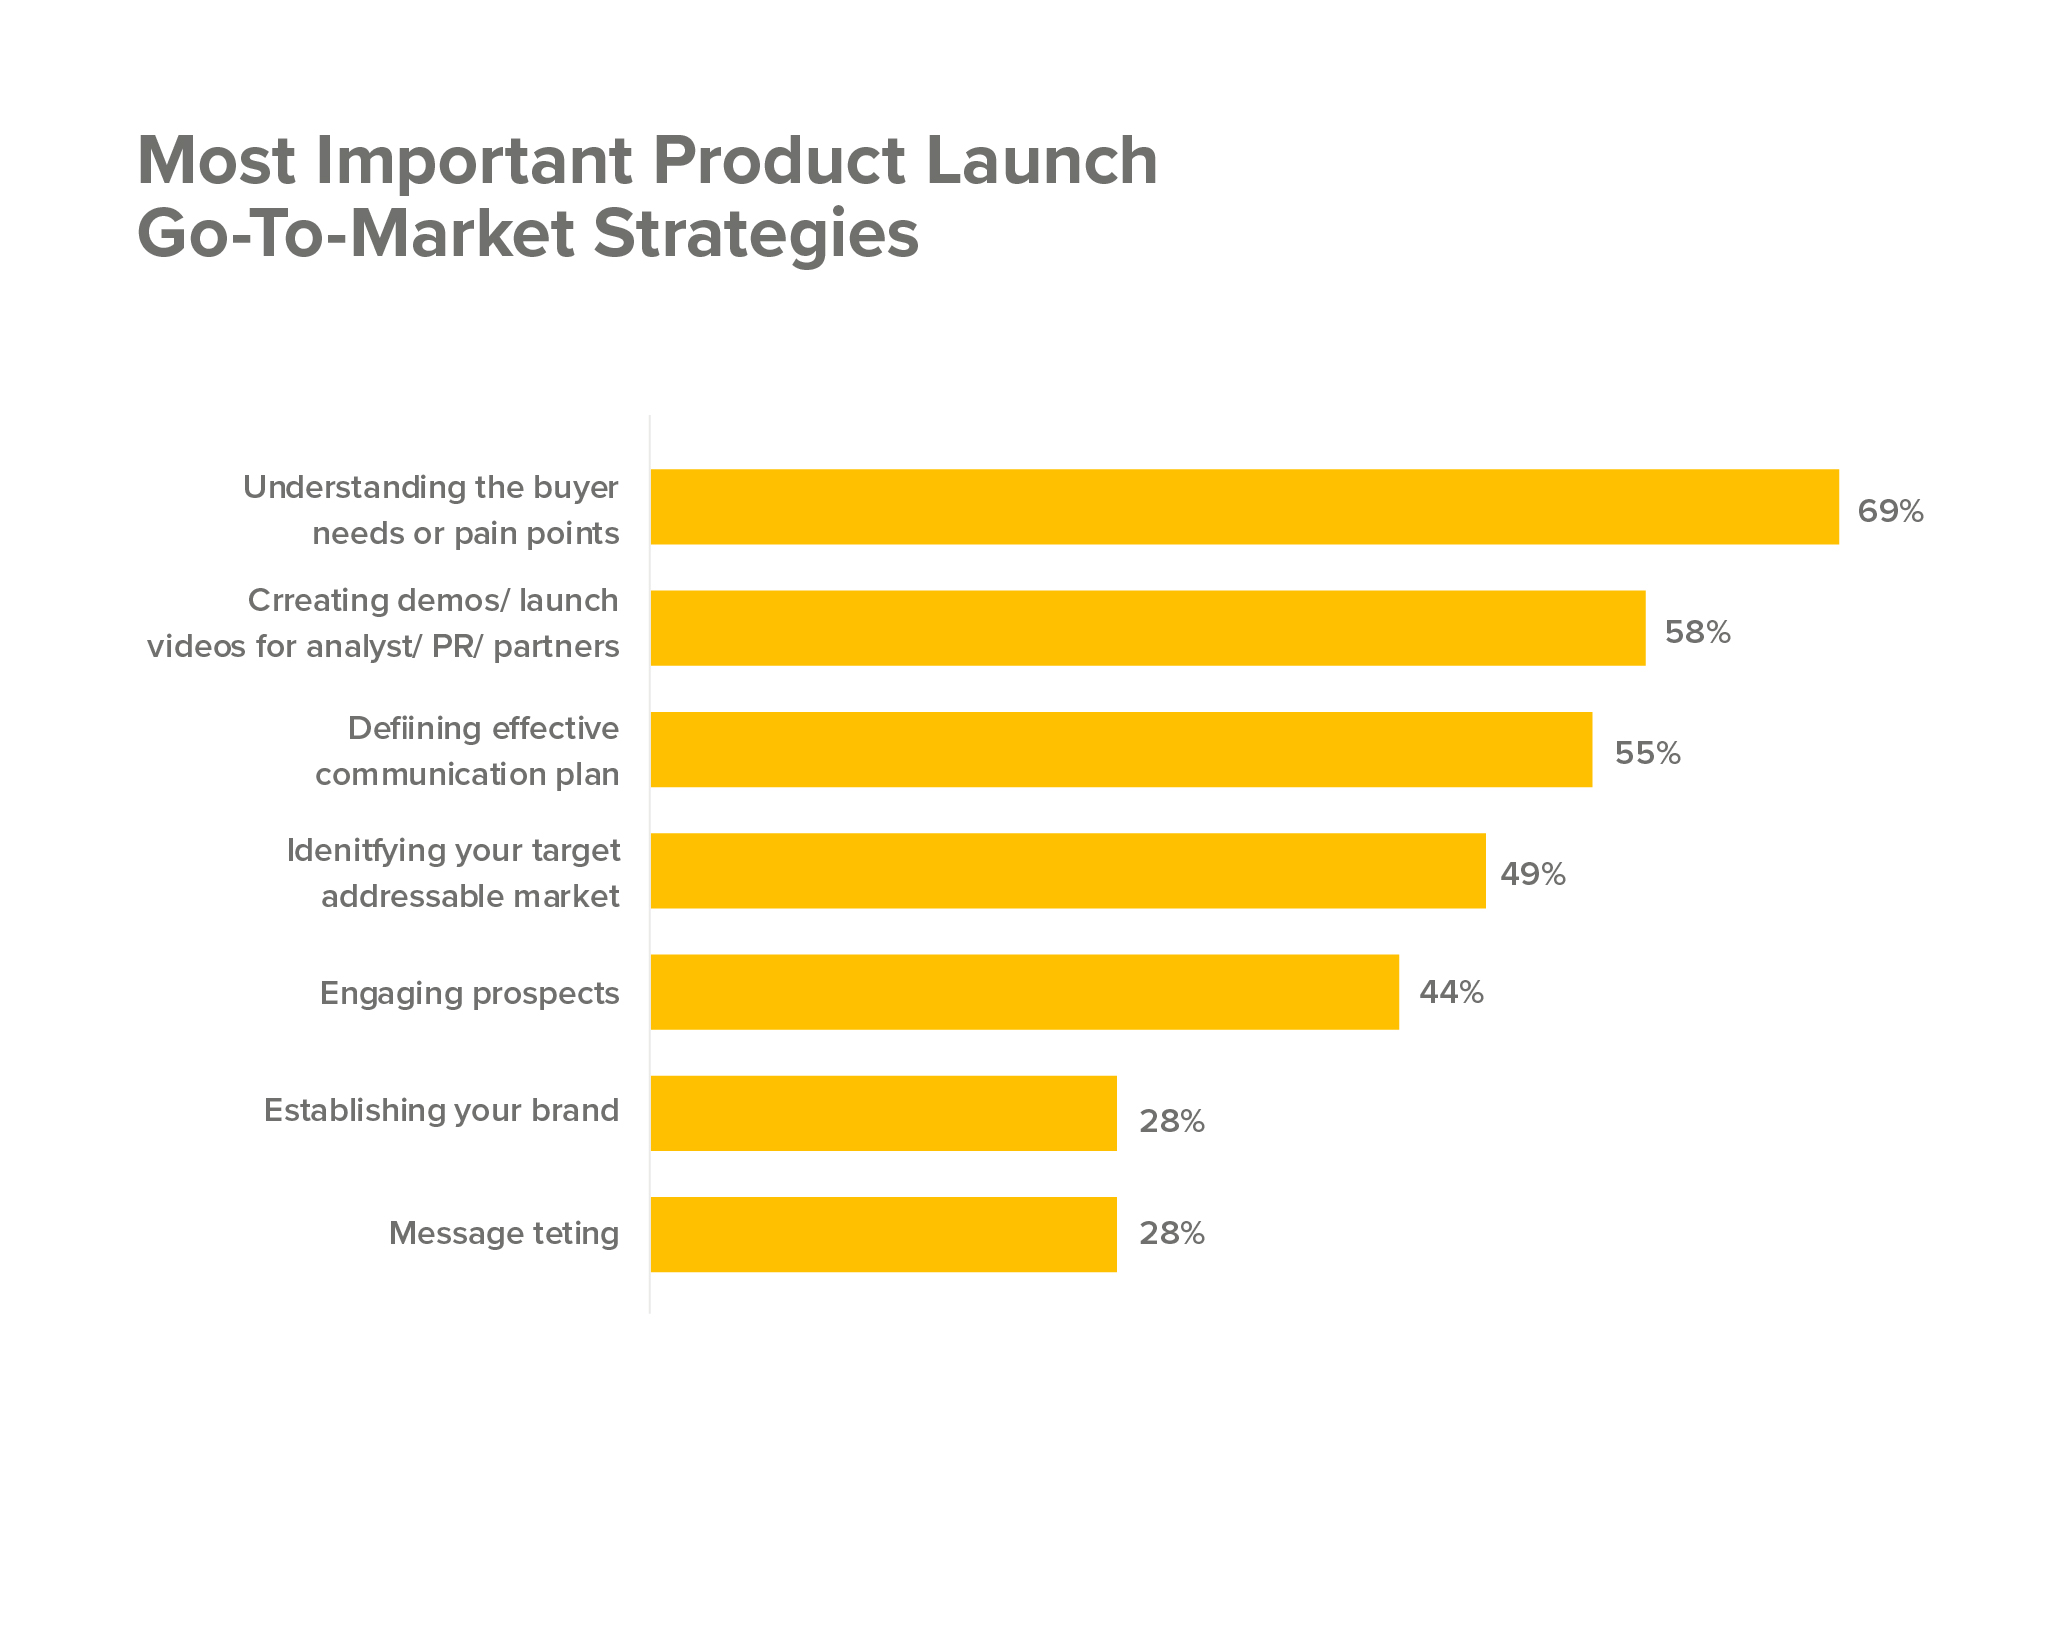 Product launch go-to market strategy